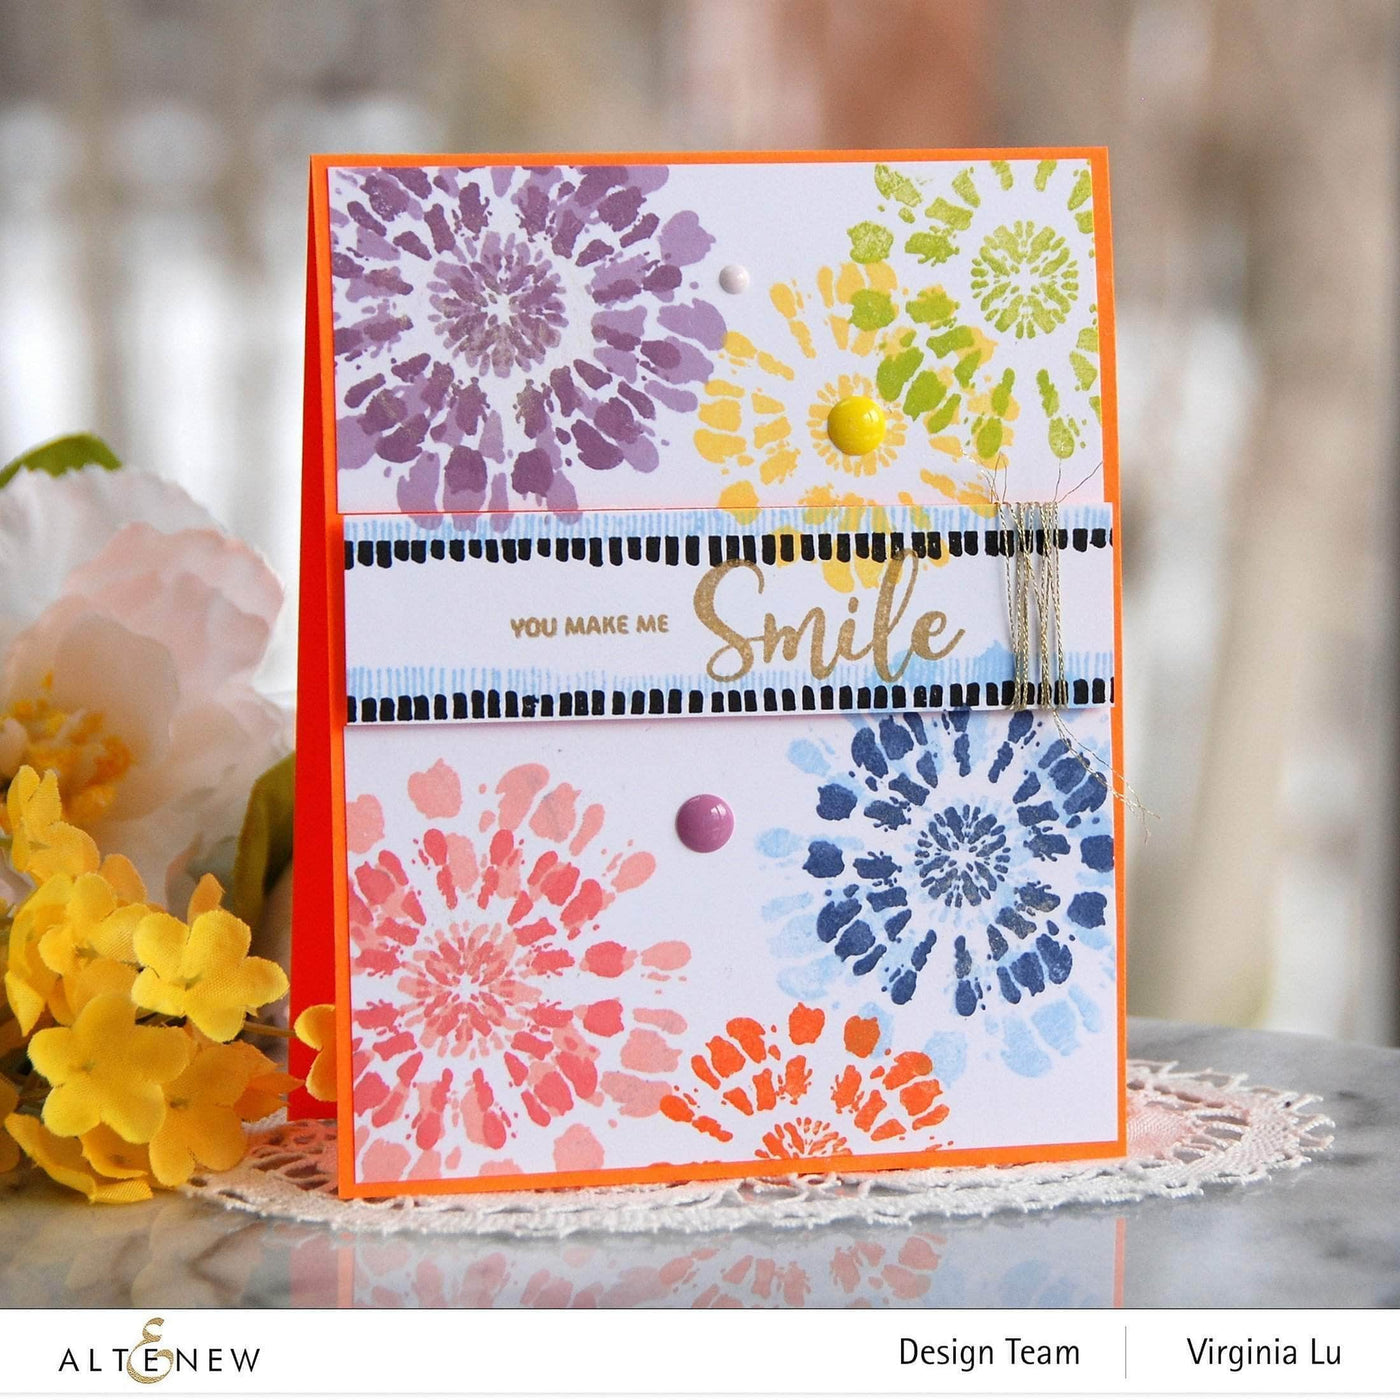 Photocentric Clear Stamps Tie Dye Motifs Stamp Set